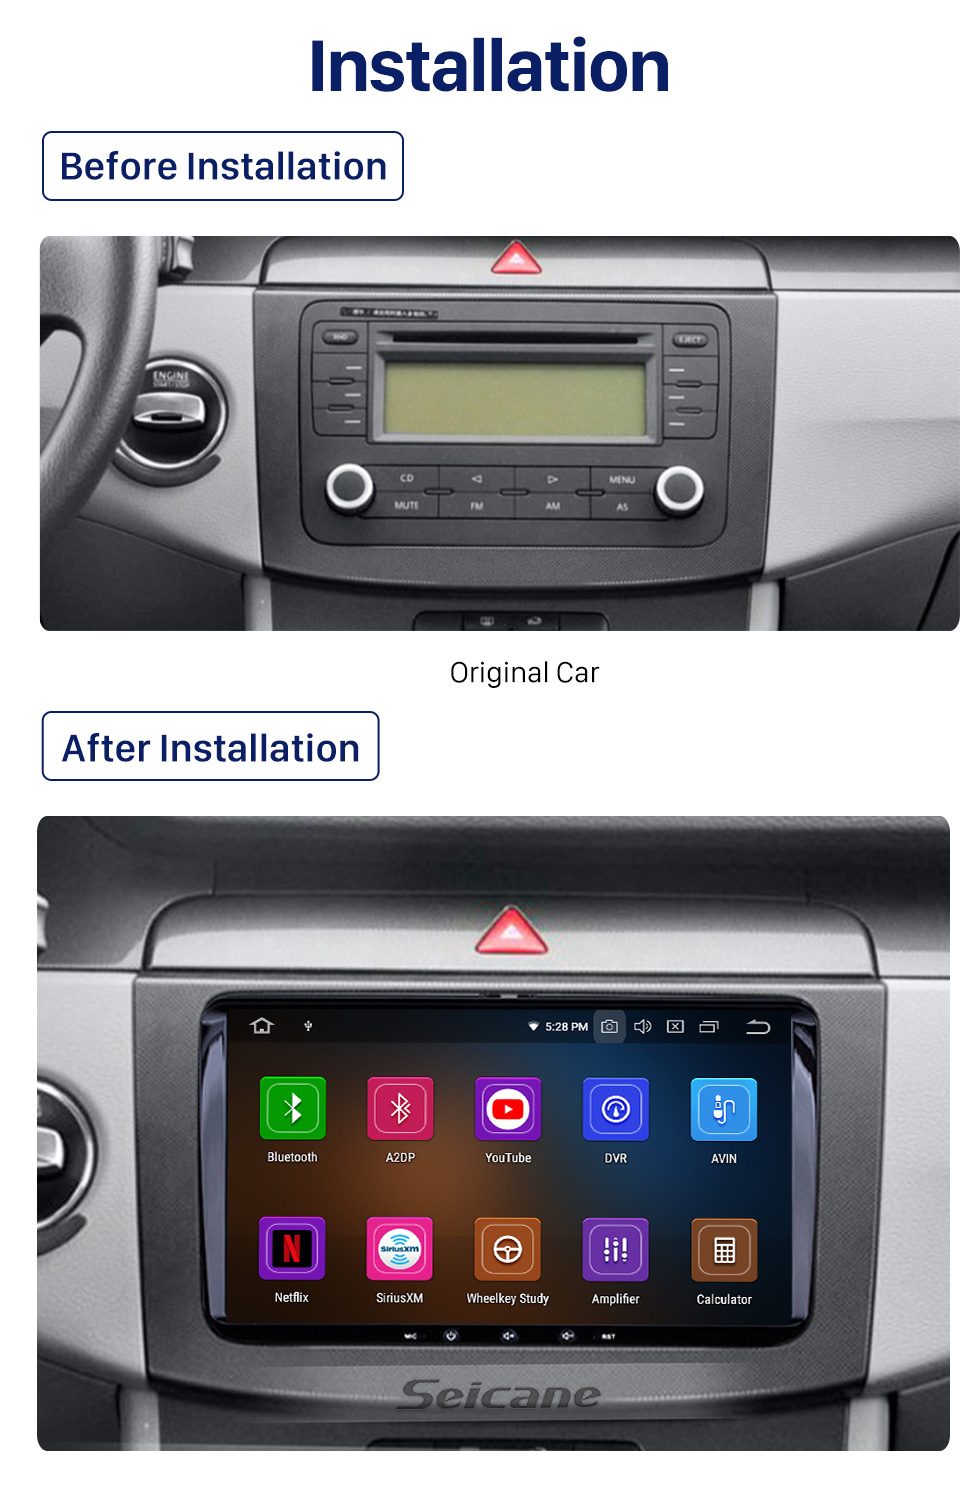 Seicane VW Volkswagen Universal SKODA Seat HD touch Screen Android 10.0 DVD Player Navigation Support Radio Rearview Camera 3G WiFi Bluetooth Mirror Link OBD2 2.5D IPS Touch Screen